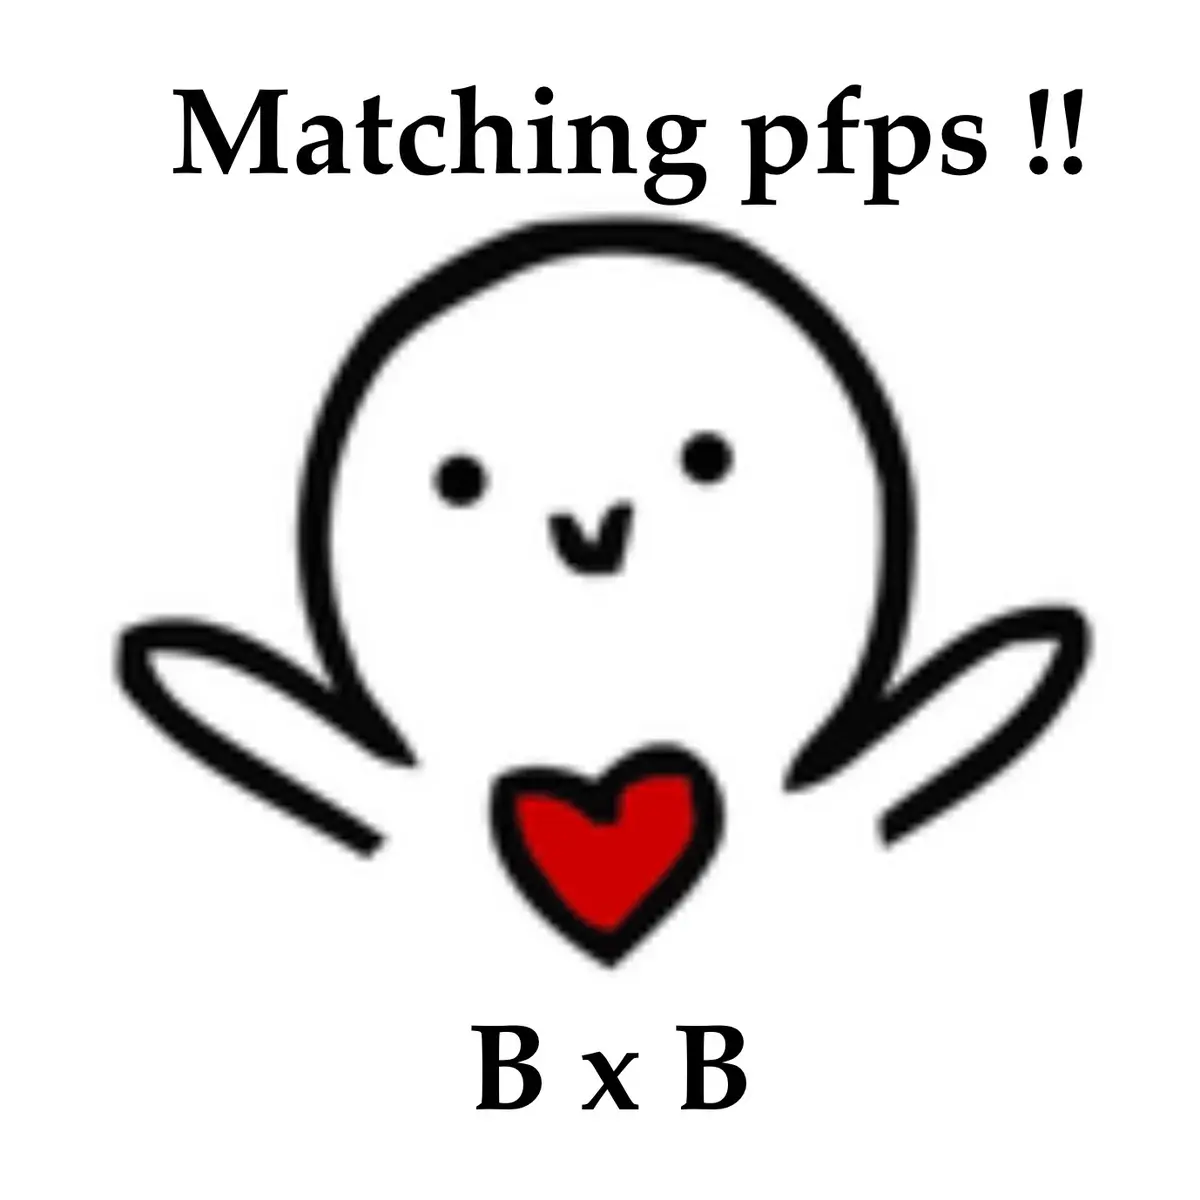 IM FELLONG LONLEY FROM THESE MATCHIN PFPS T°T; THANKS FOR WATCHING, HAVE A GREAT DAY/NIGHT!!   |tags: #fyp #fypageシ #matchin #bxb #couple #friends #random #HITMEHARDANDSOFT #backagain #why 